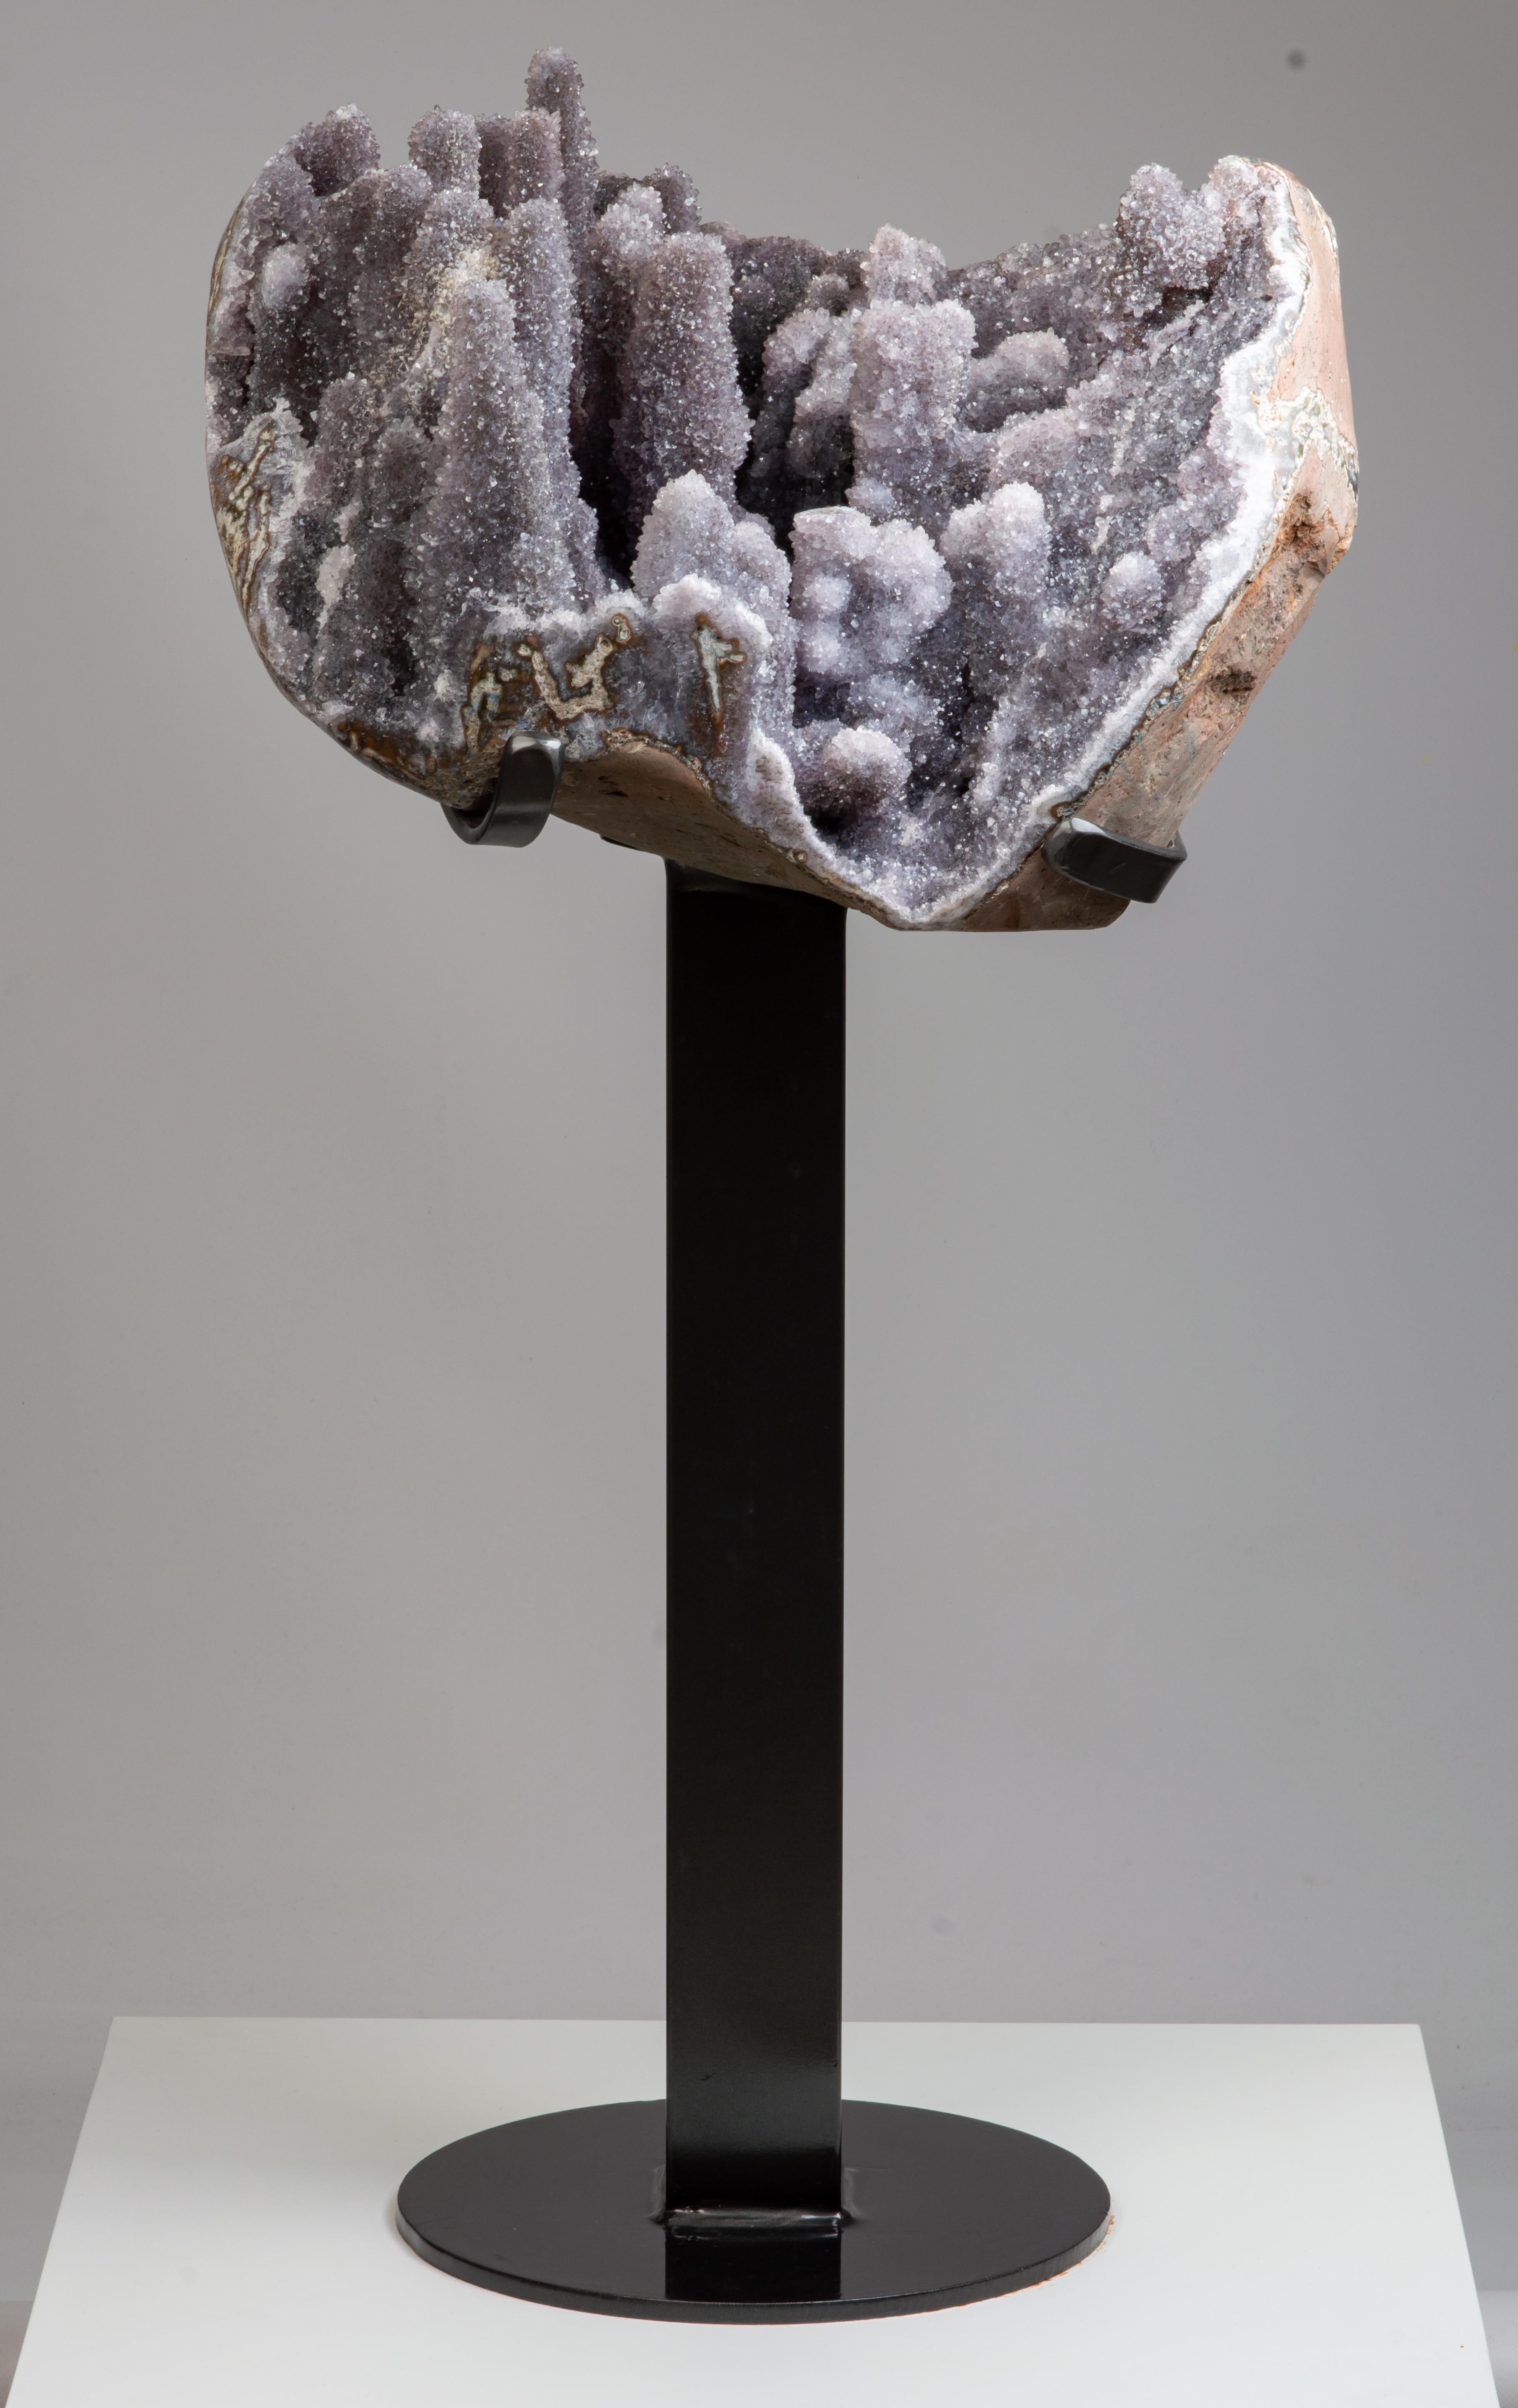 A stunning half geode containing many tall stalactites resembling an other
worldly landscape. The stalactites covered in grey-lilac druzy quartz. the borders
polished.

This piece was legally and ethically sourced directly in the prestigious